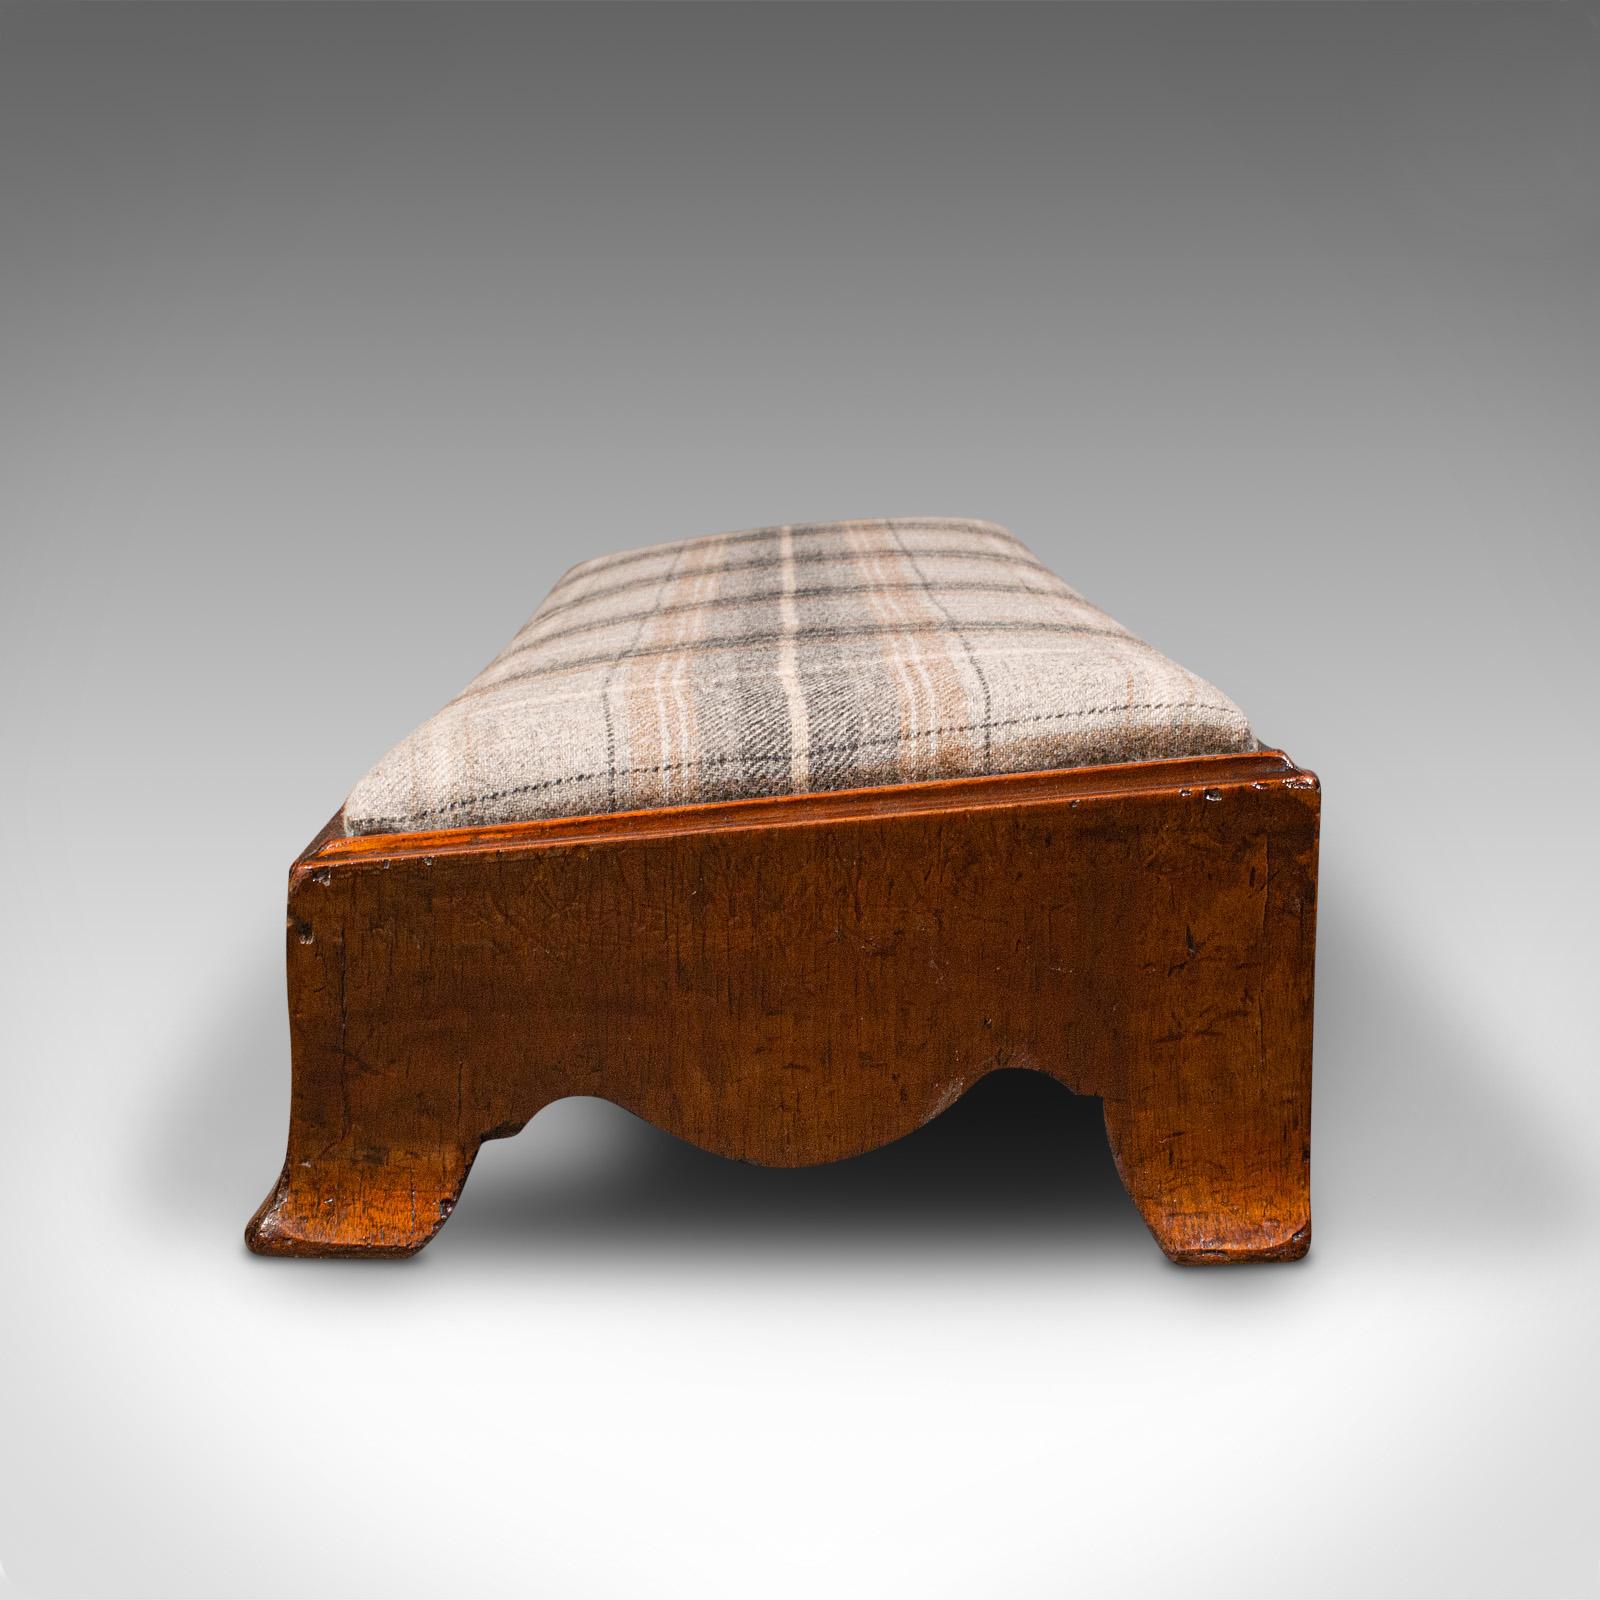 Antique Carriage Stool, English, Tweed Upholstery, Fireside Rest, Georgian, 1780 In Good Condition For Sale In Hele, Devon, GB